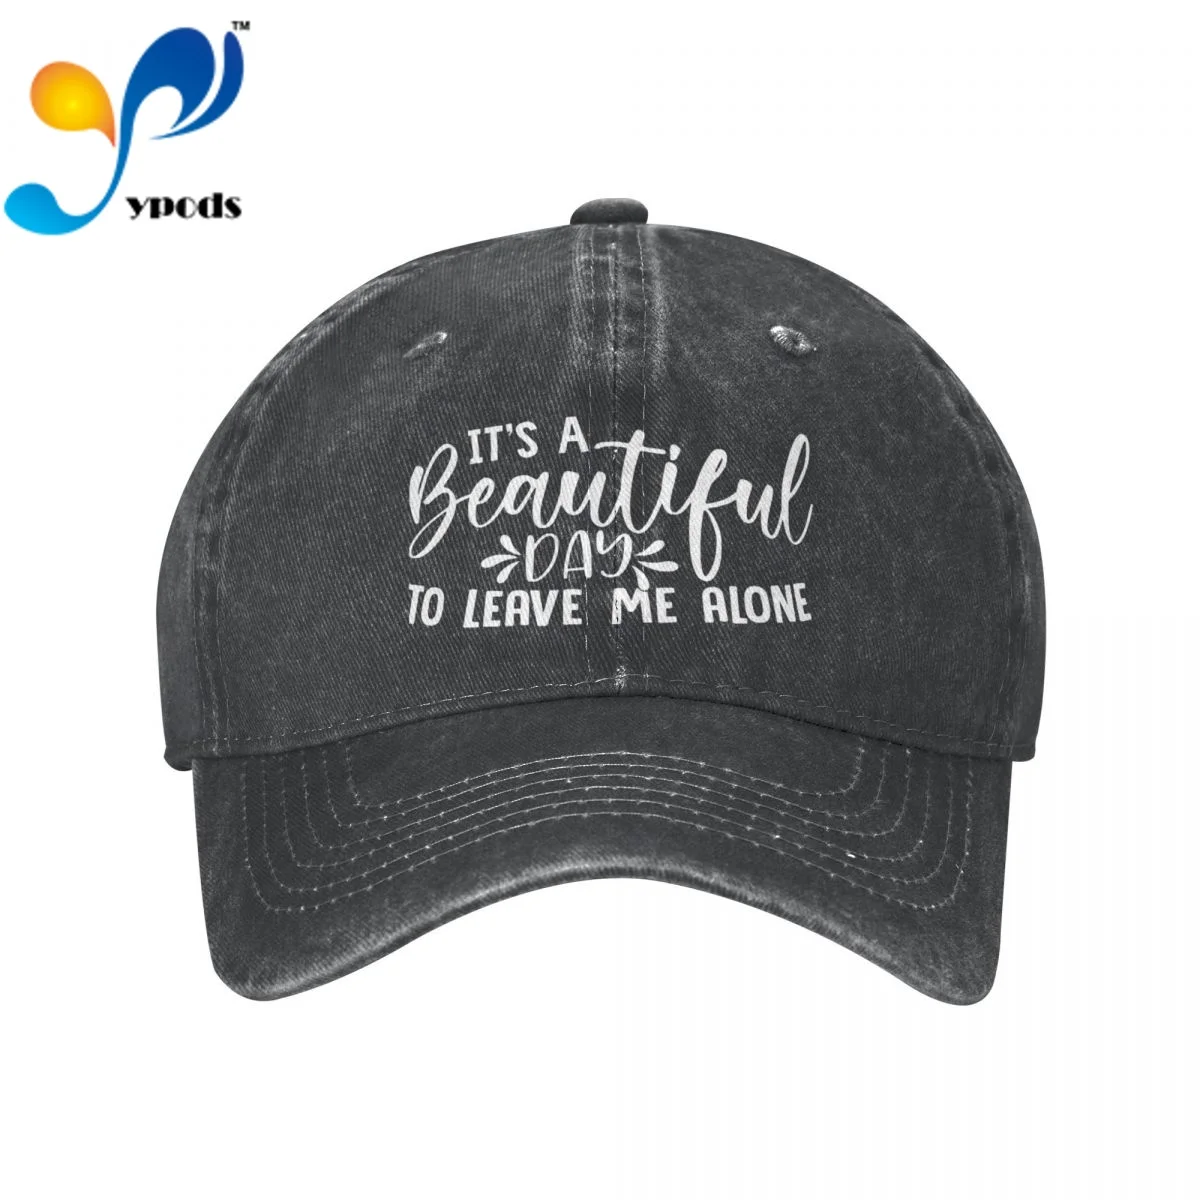 

It's A Beautiful Day To Leave Me Alone Women Men Cotton Baseball Cap Unisex Casual Caps Outdoor Trucker Snapback Hats